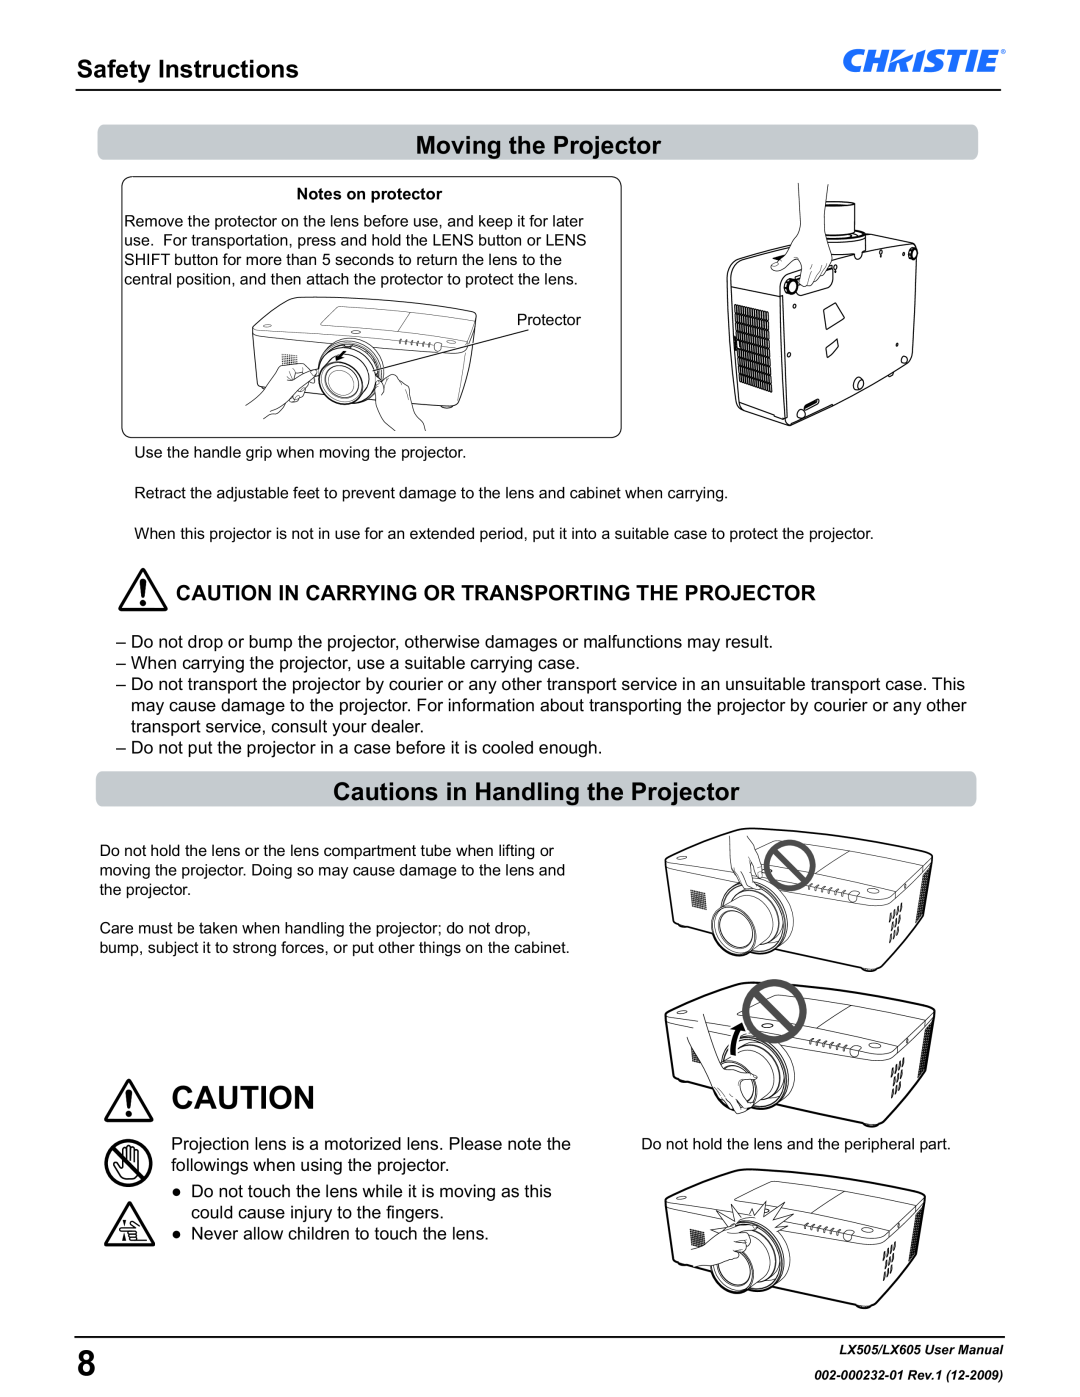 Christie Digital Systems LX605 manual Safety Instructions Moving the Projector, Cautions in Handling the Projector 